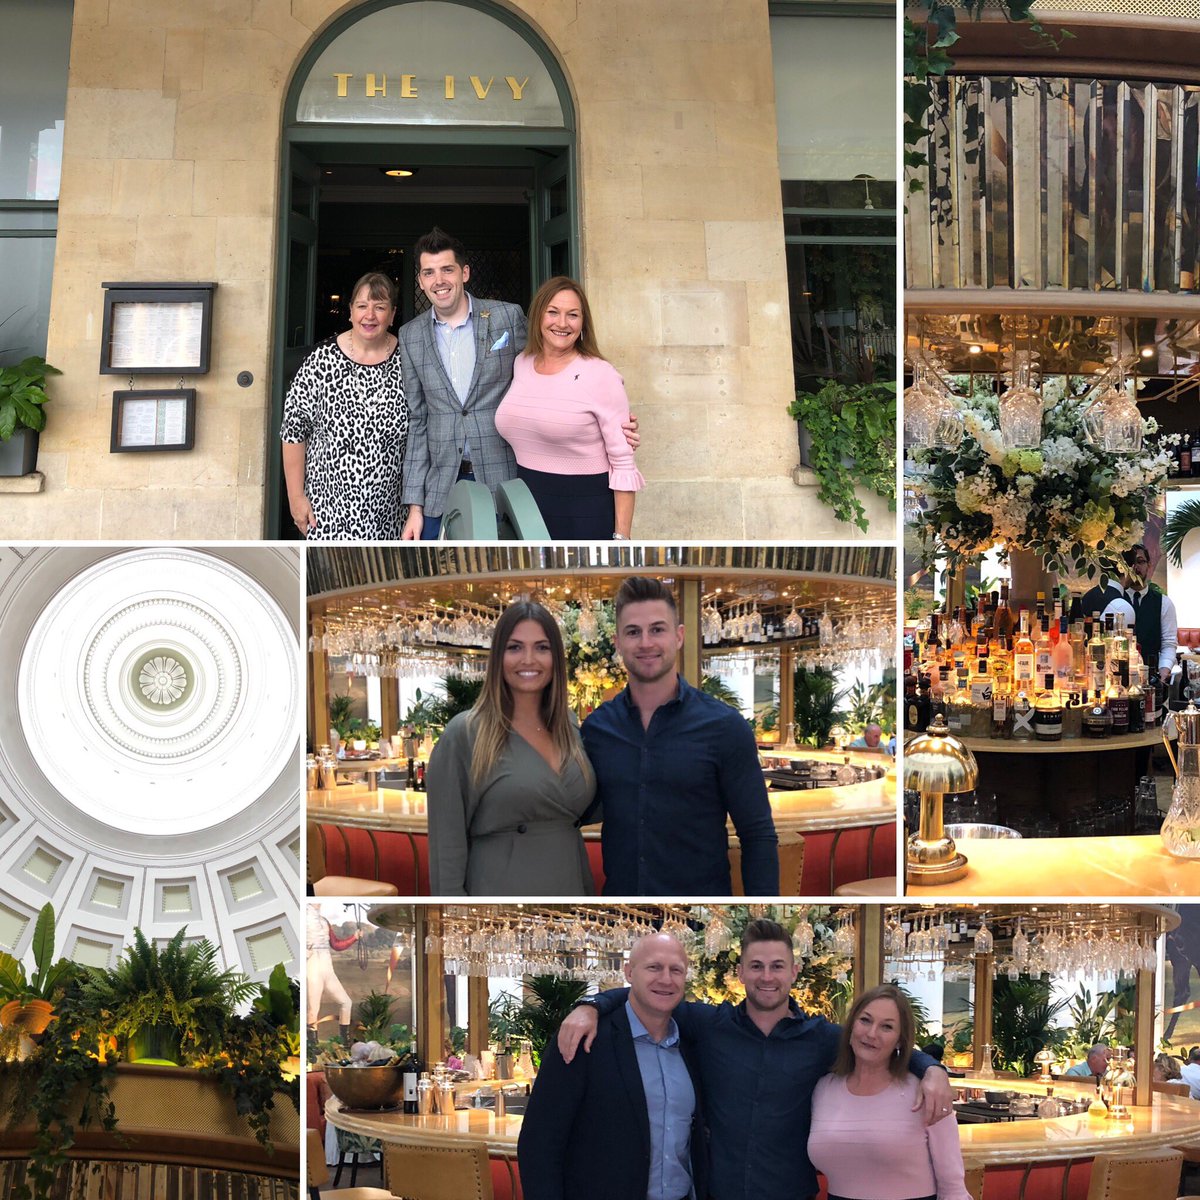 Thank you to the @theivybrasserie #cheltenham and GM @Stevewilmer and crew for sponsoring the @trindermonial launch a fab venue  @HenryTrinder #committee @glanners1 @CathrynHage and to all our business colleagues and friends! What a turn out ! @PiedPiperAppeal